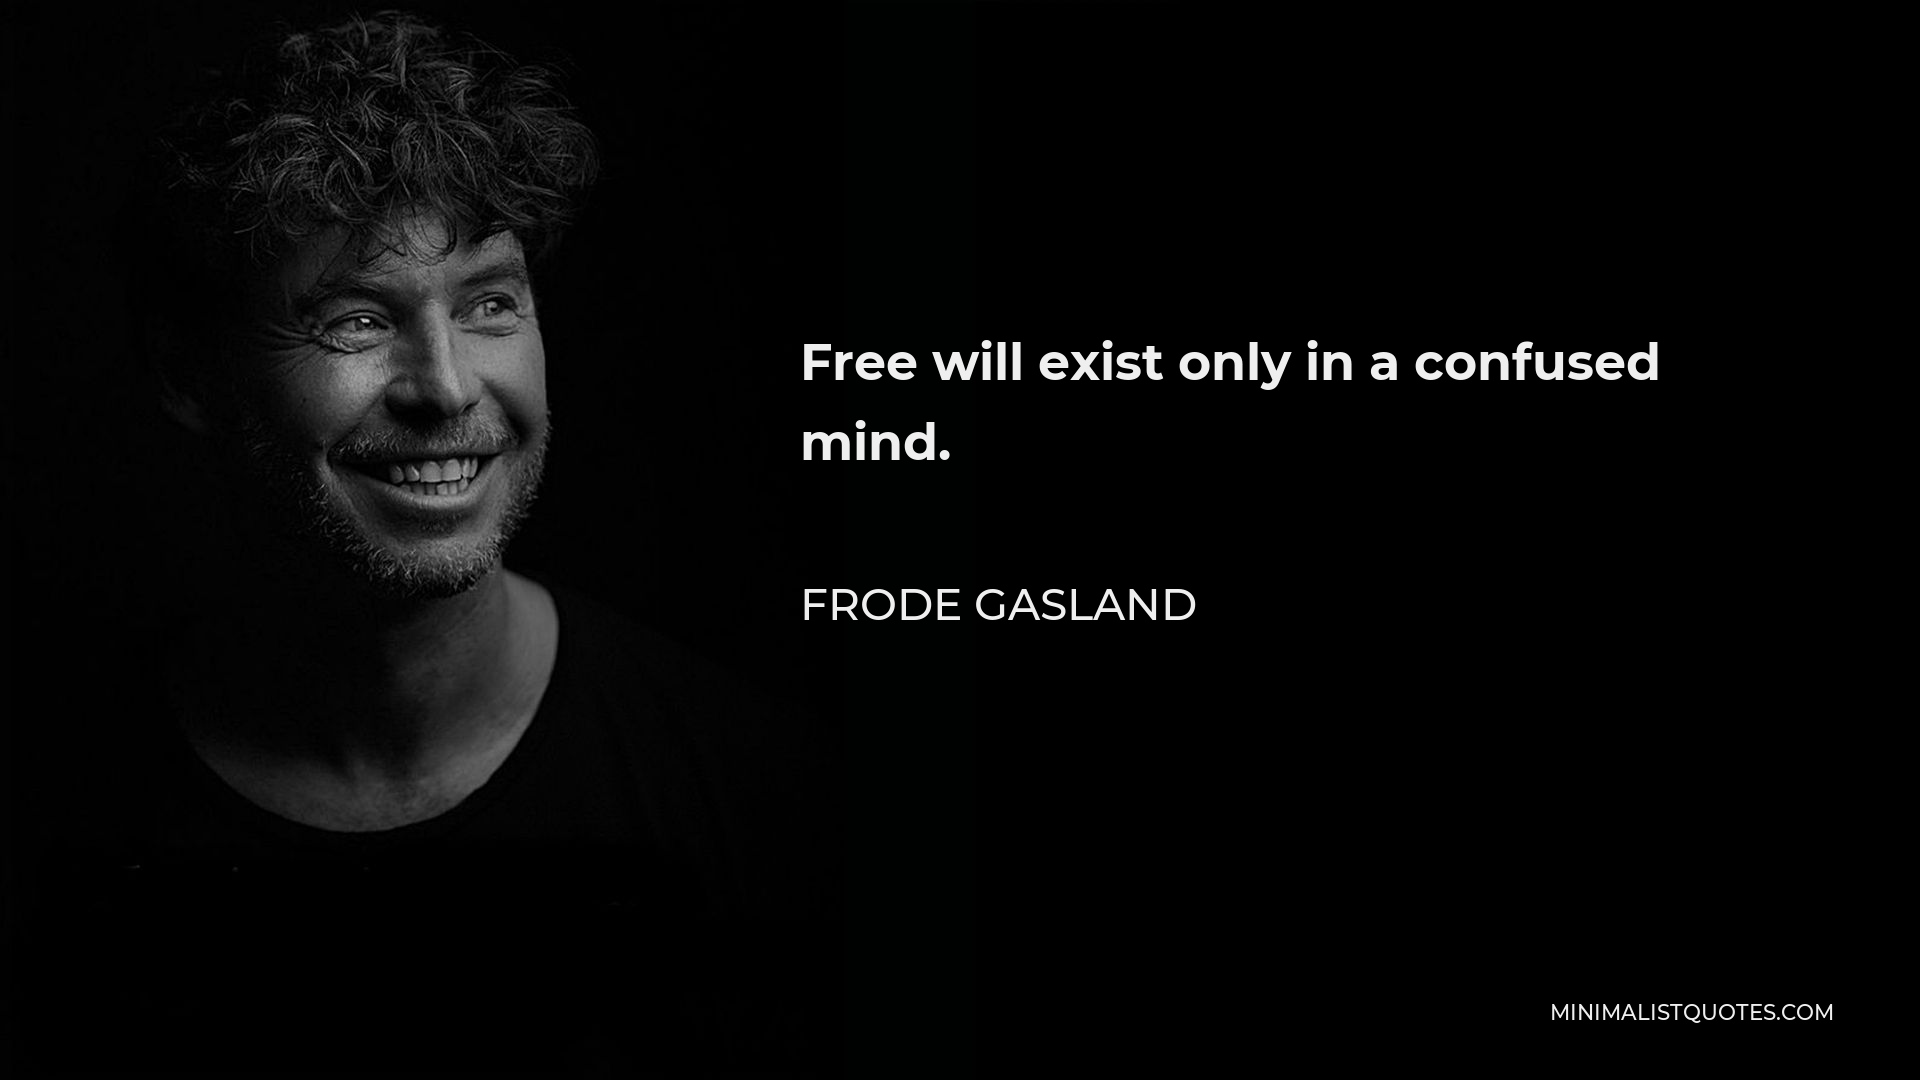 Frode Gasland Quote - Free will exist only in a confused mind.